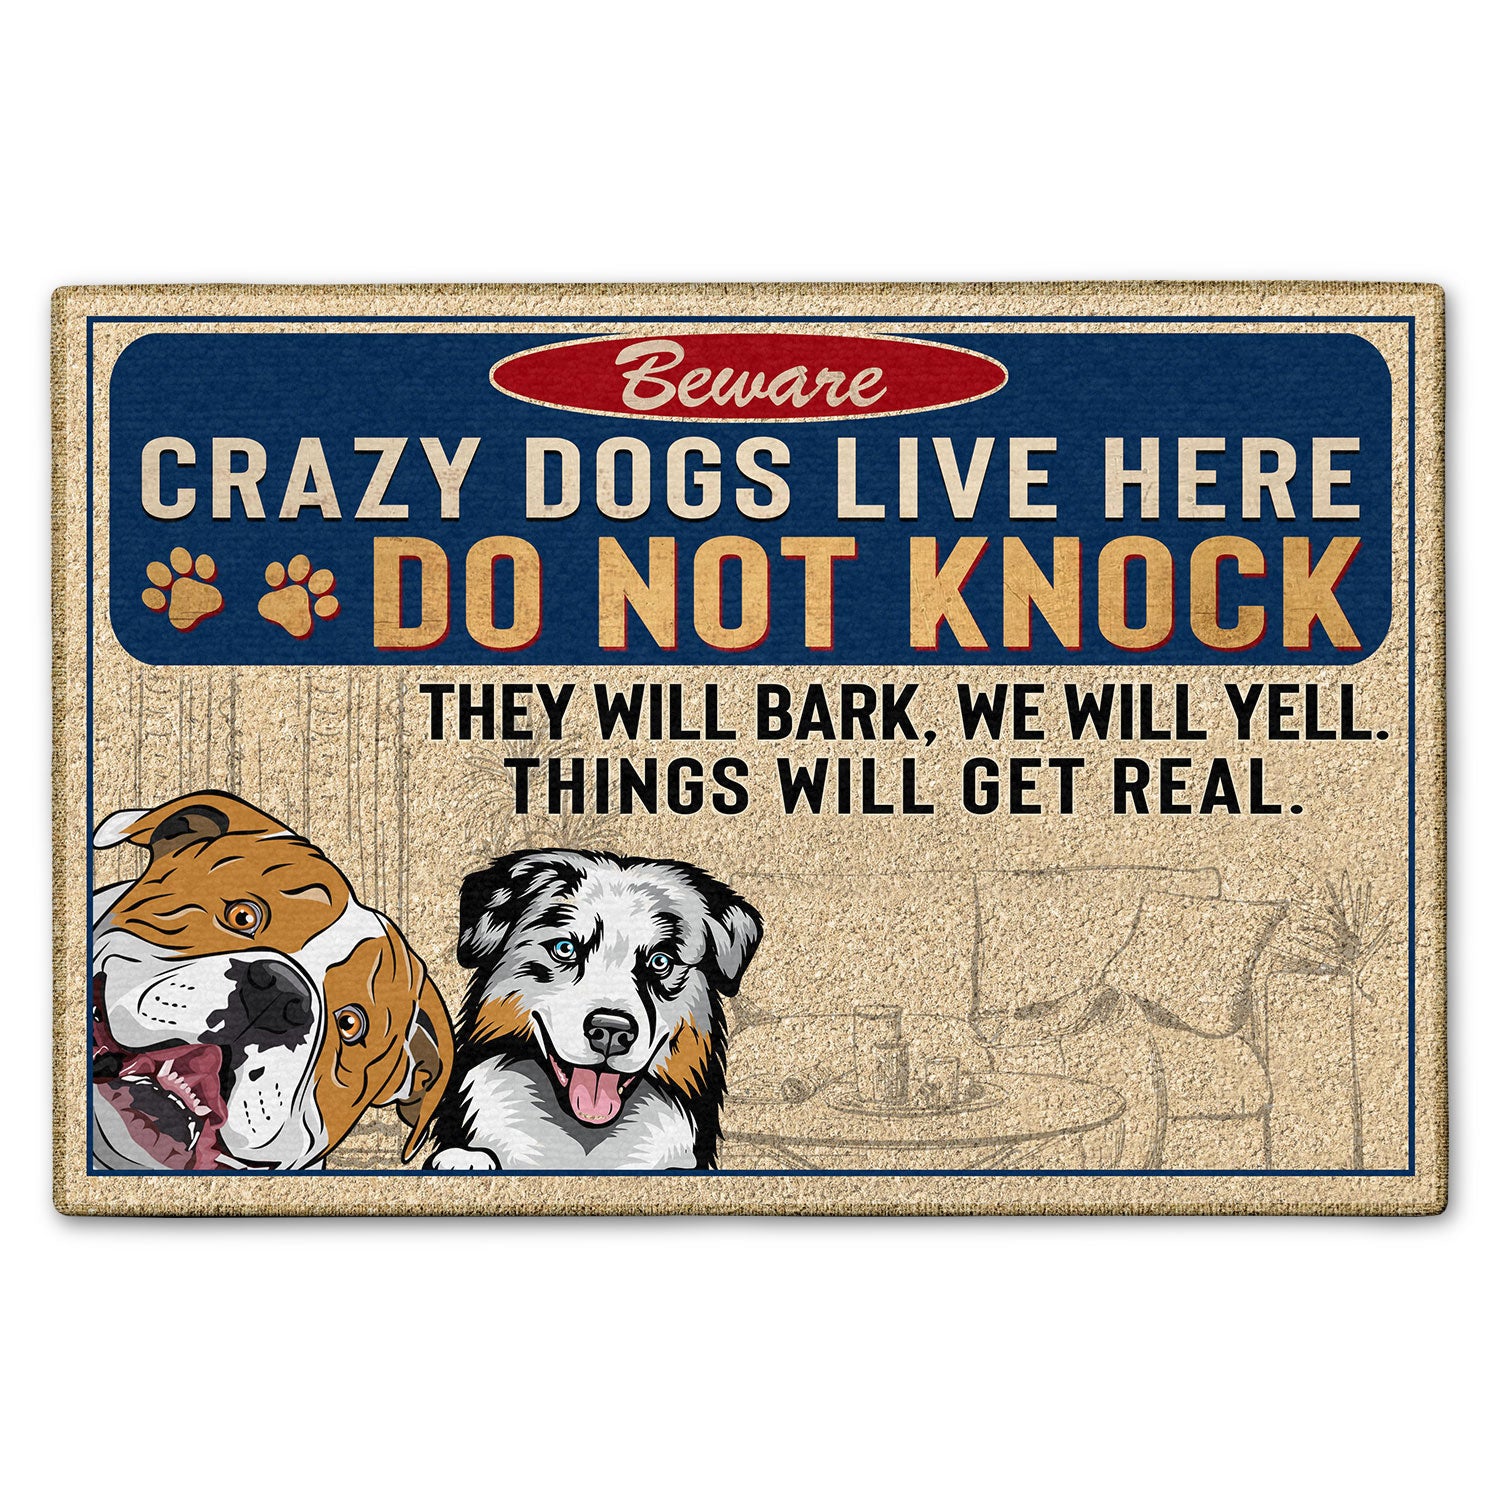 Crazy Dogs Live Here Do Not Knock - Birthday, Loving, Funny, Home Decor Gift For Dog Mom, Dad, Pet Lover - Personalized Custom Doormat